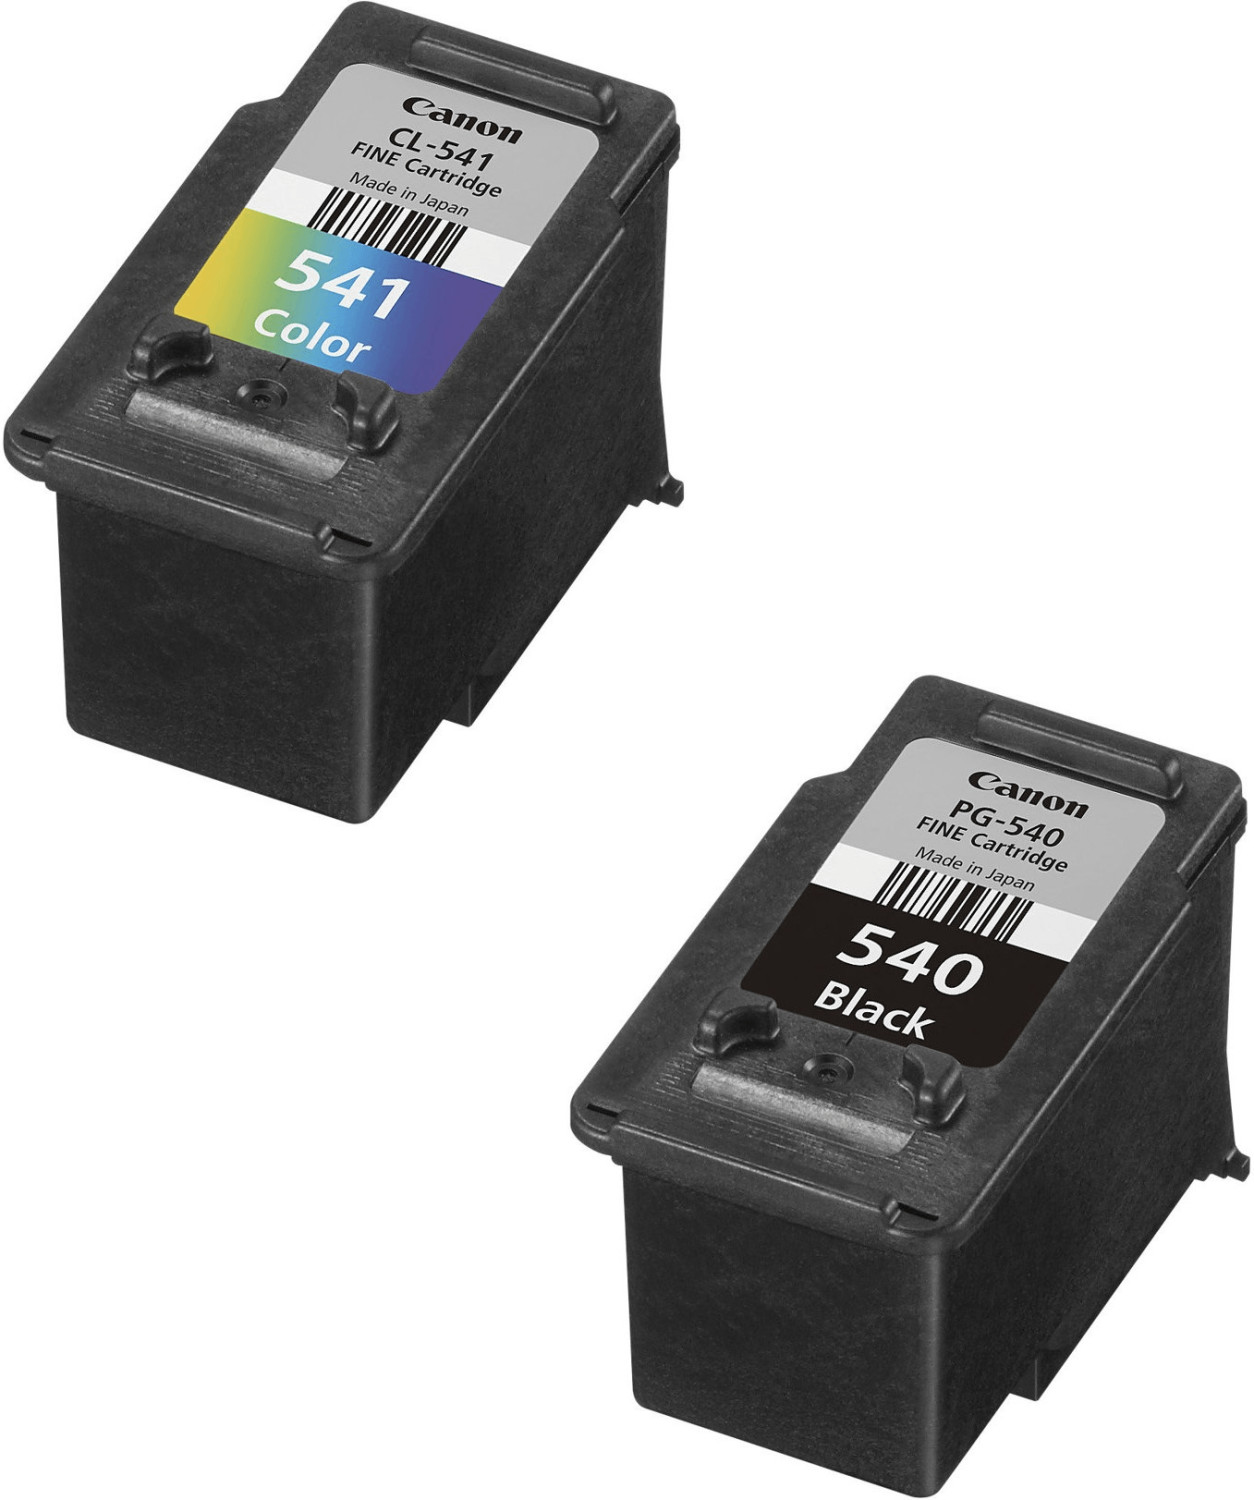 Canon PG-540 and CL-541 Printer Ink Cartridges